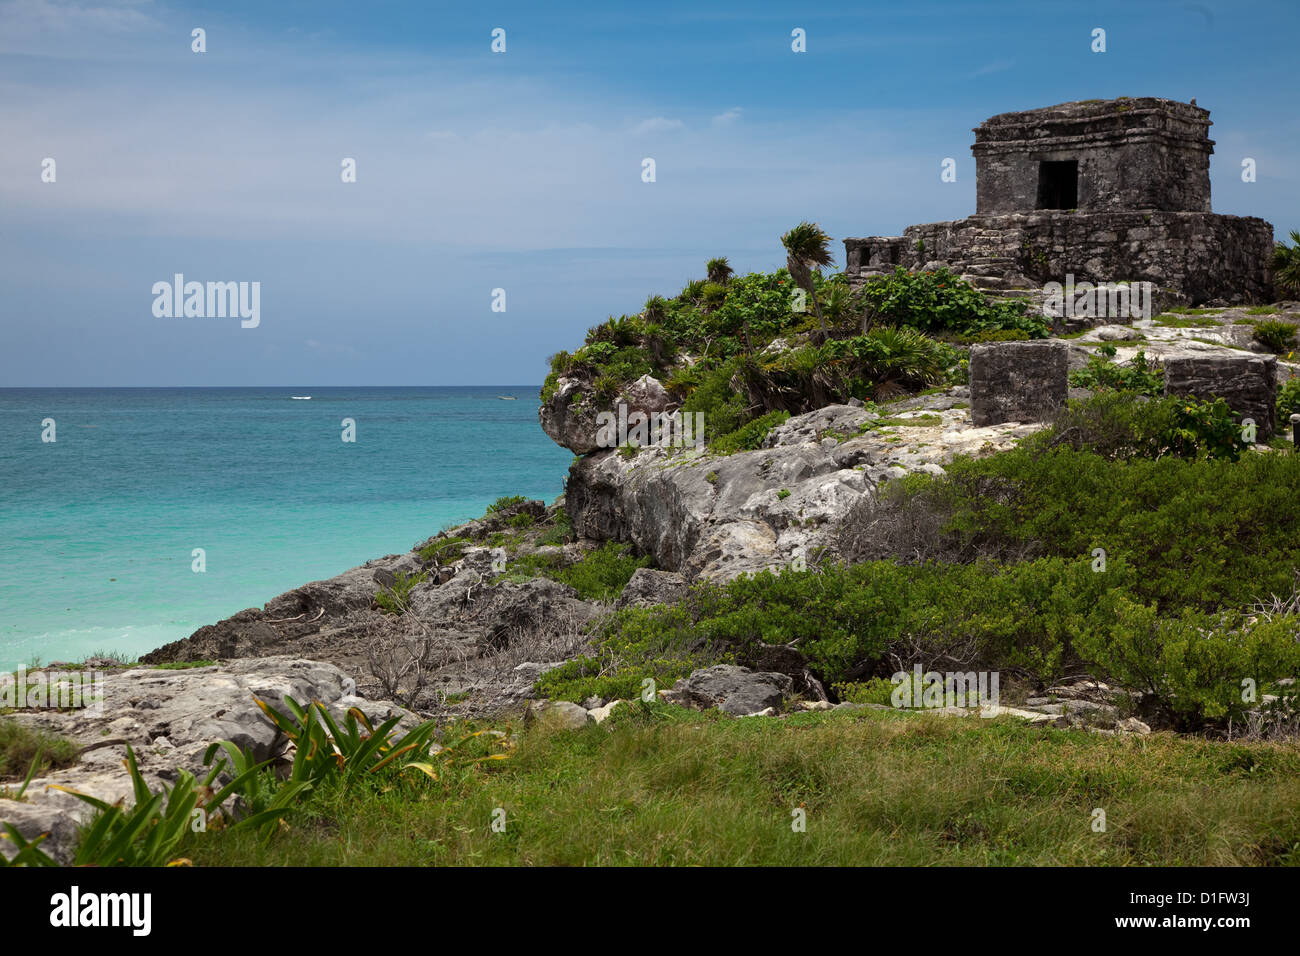 The Mayan ruins at Tulum are spectacularly located on the coast of the Yucatan Peninsula, Mexico. Stock Photo